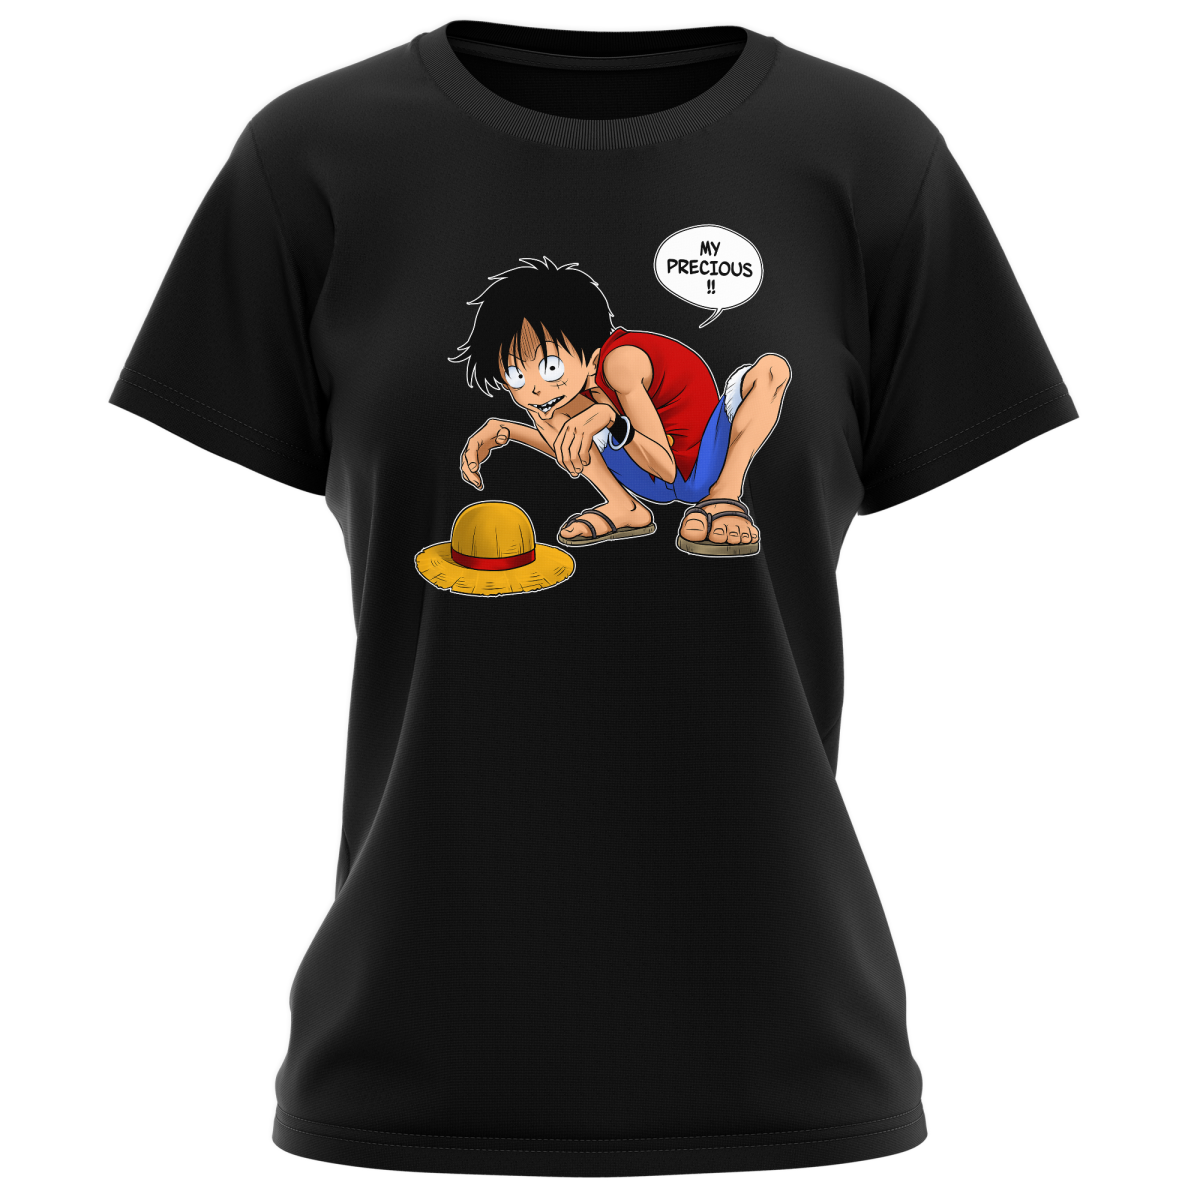 Funny One Piece The Lord Of The Rings Women T Shirt Monkey D Luffy And Gollum One Piece The Lord Of The Rings Parody Ref 744